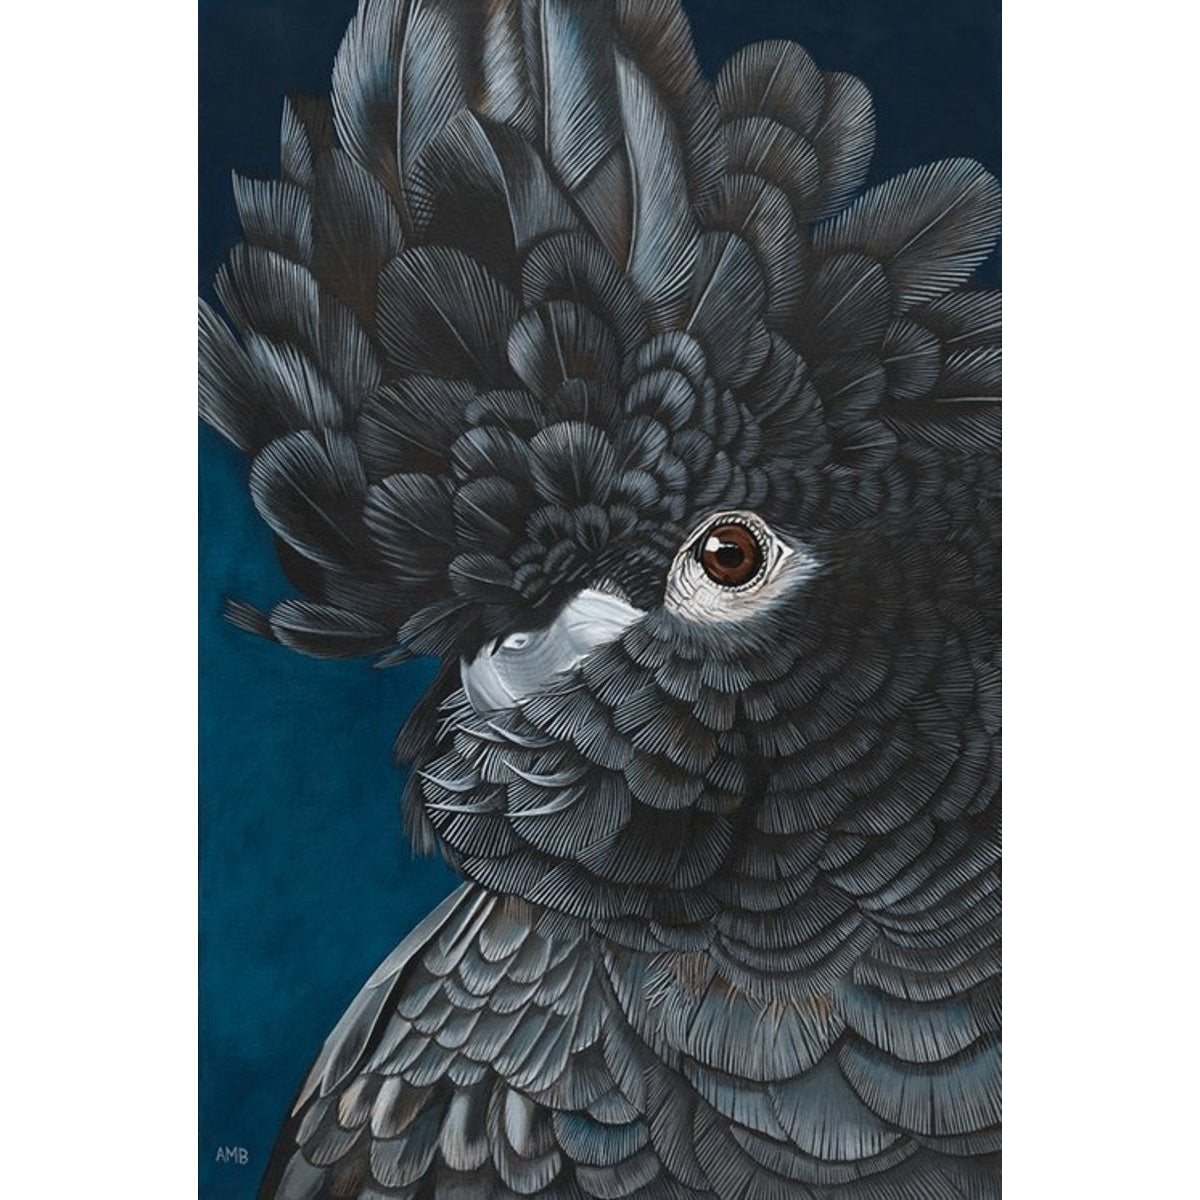 Derek – Black Red Tailed Cockatoo - Acrylic on canvas